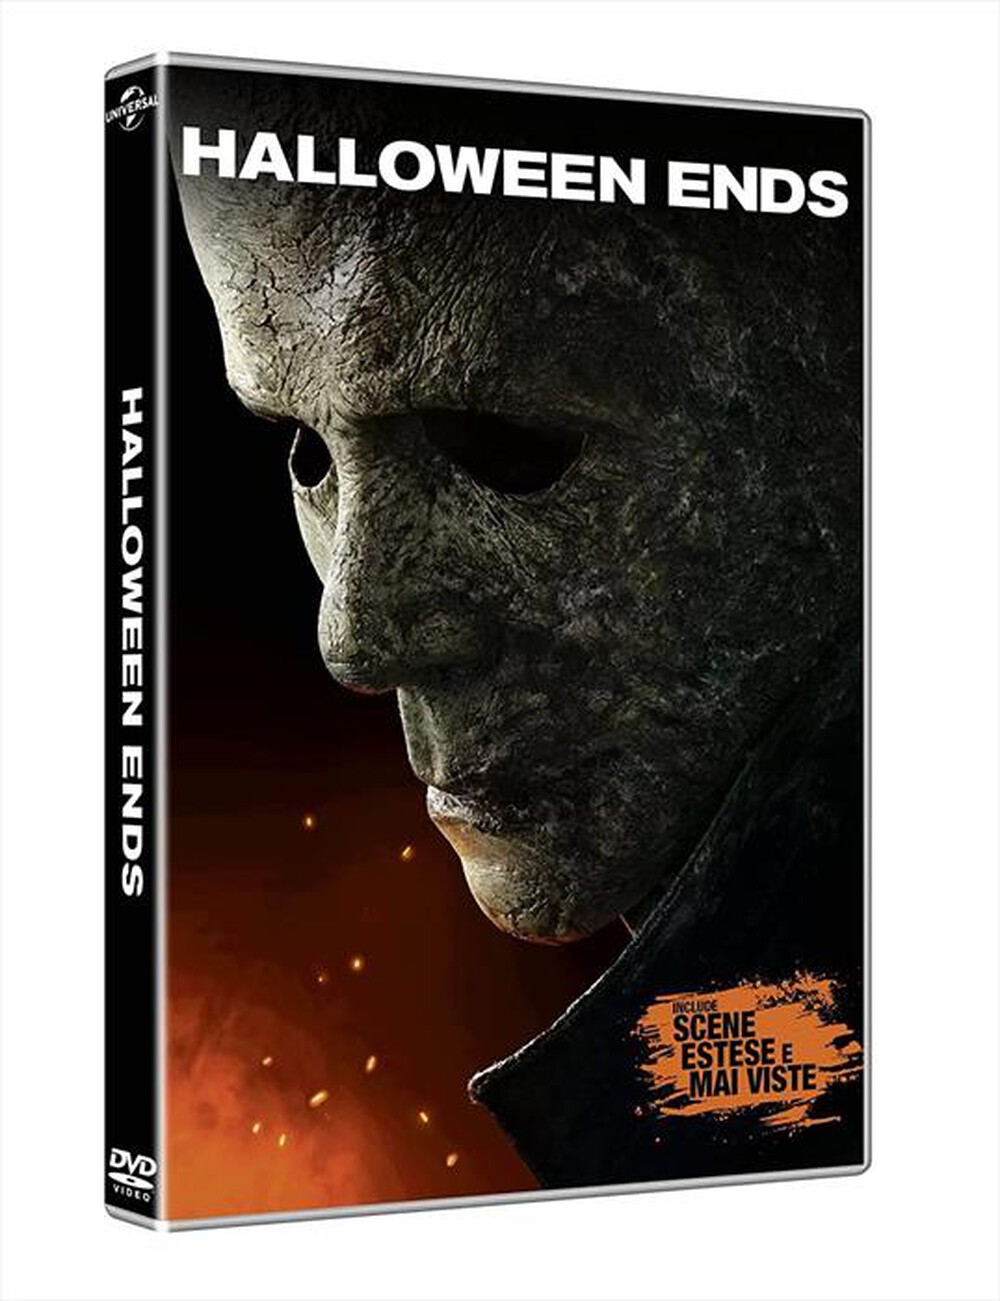 "UNIVERSAL PICTURES - Halloween Ends"